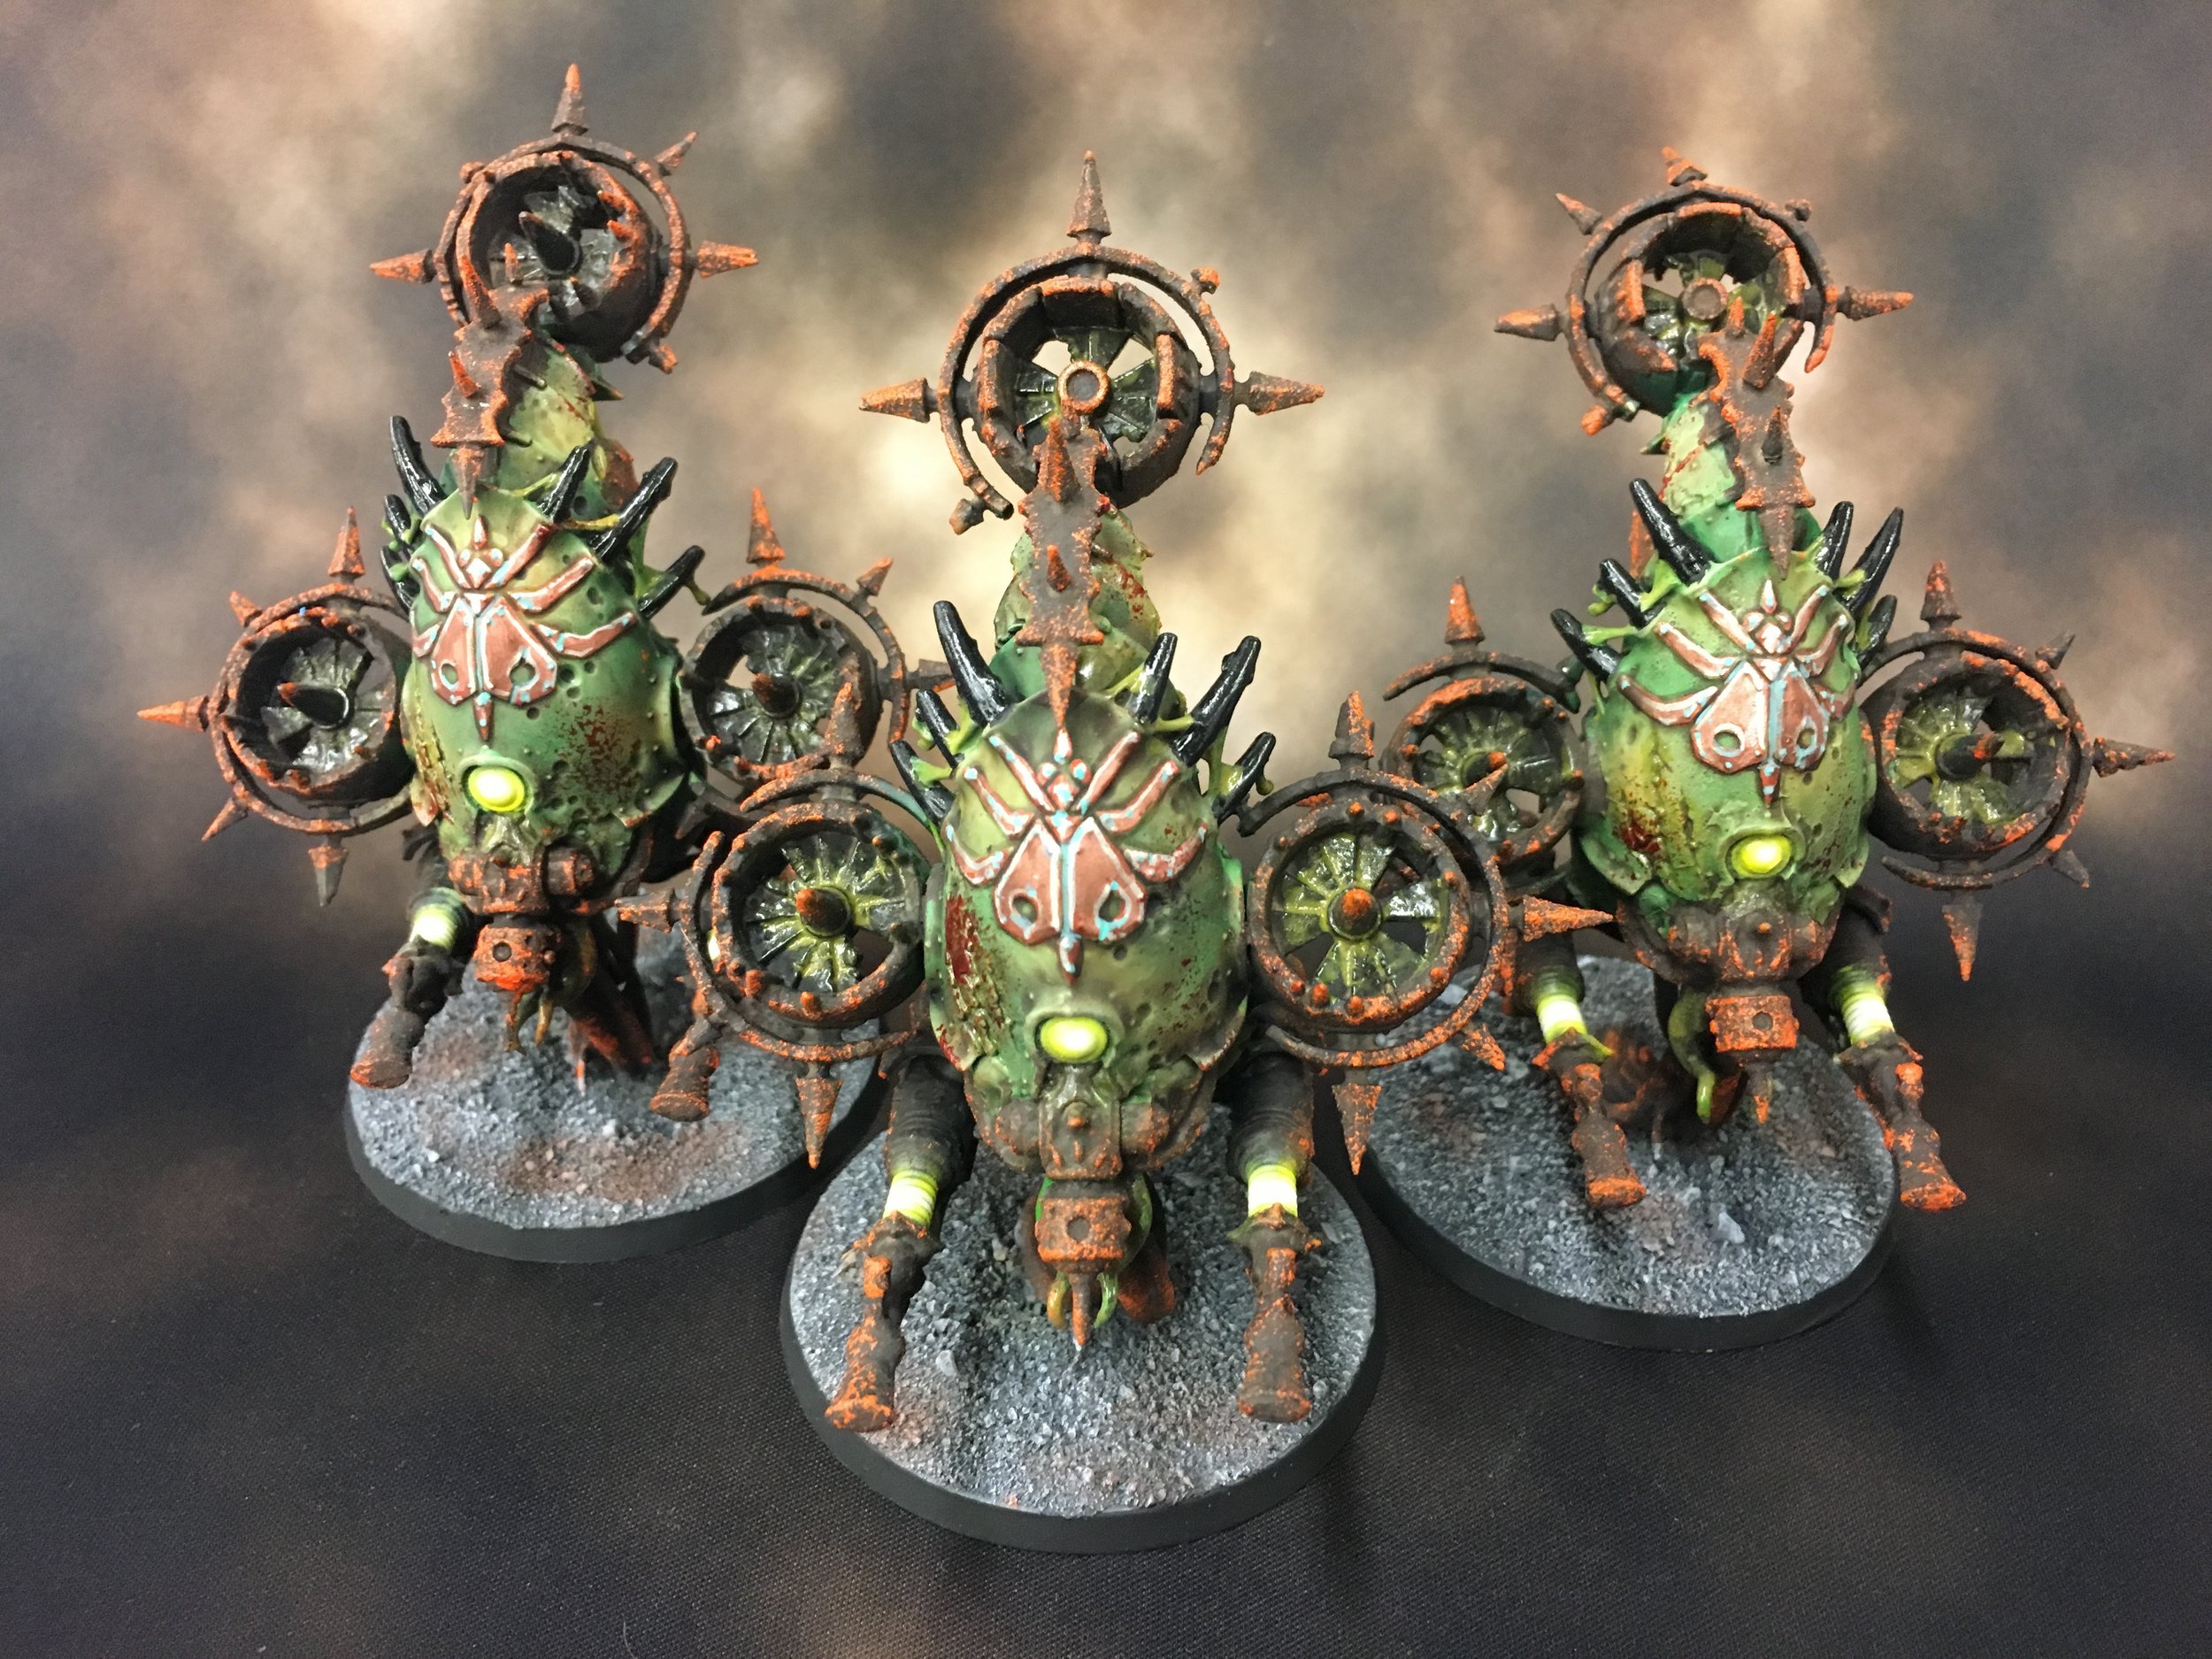 Live Stream Tonight! Nurgle Drone Give Away! — Frontline Gaming Paint Studio